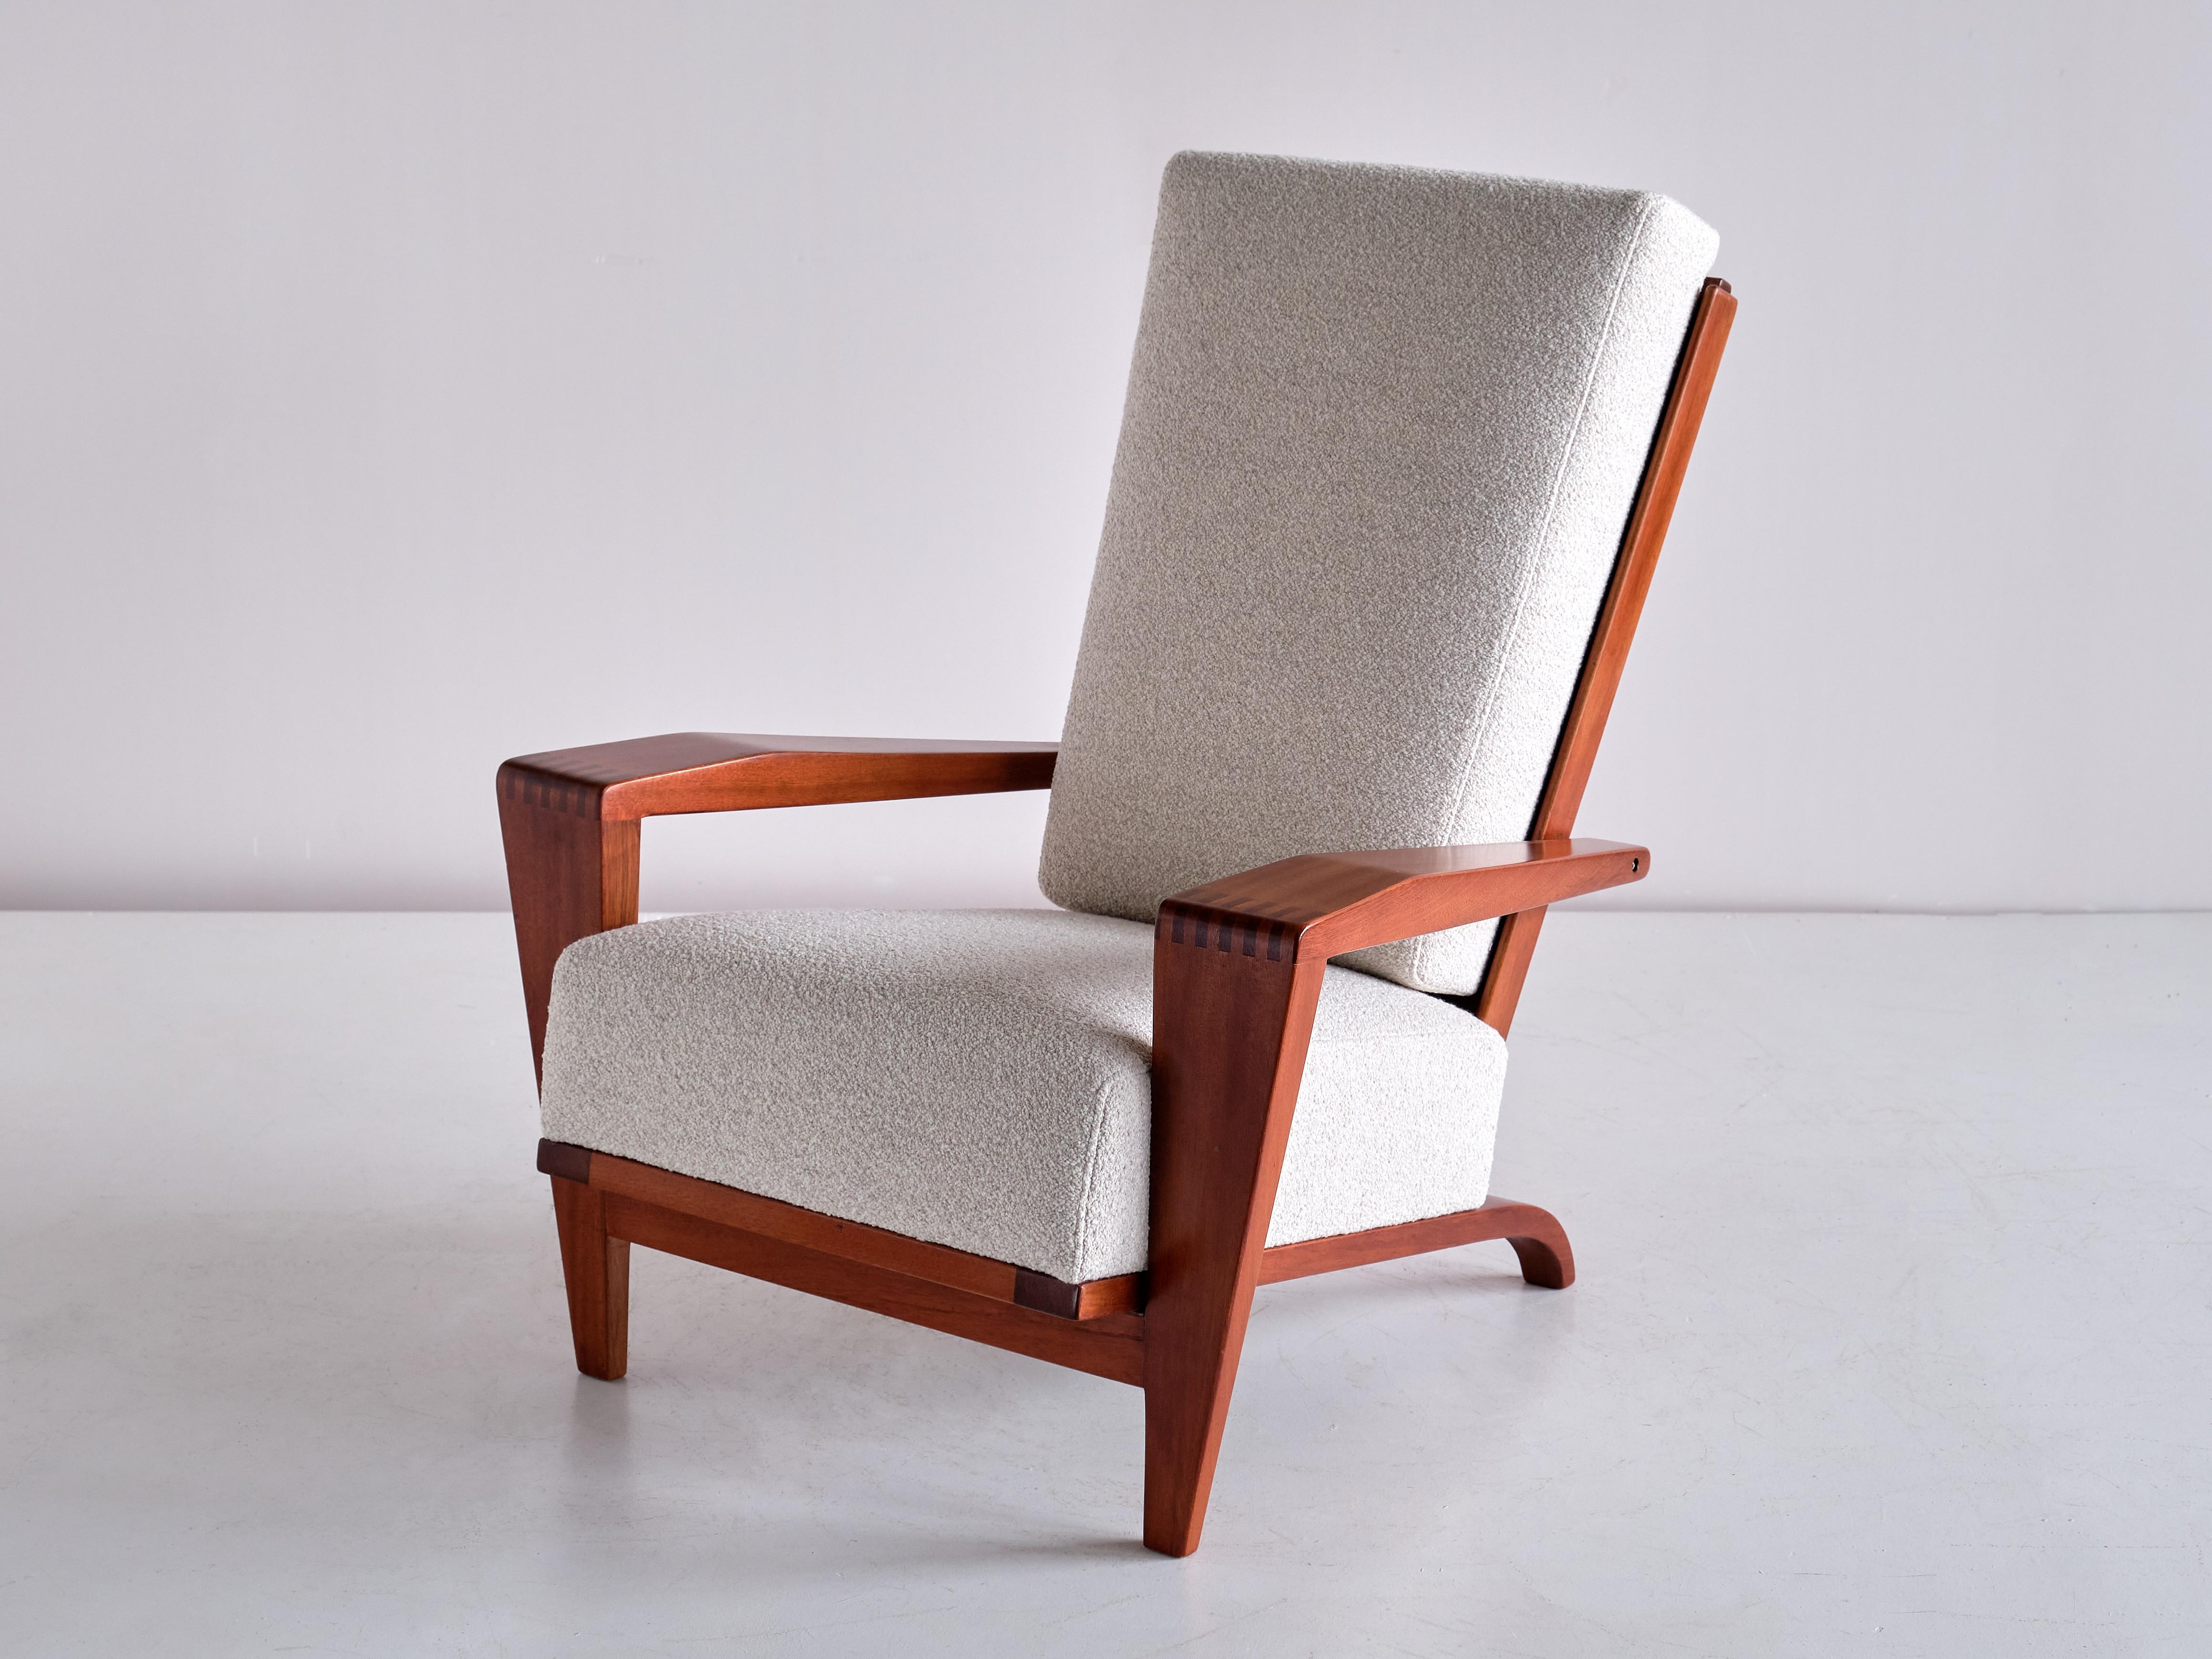 Pair of André Sornay Armchairs in Sapele Mahogany and Bouclé, France, 1950s For Sale 6